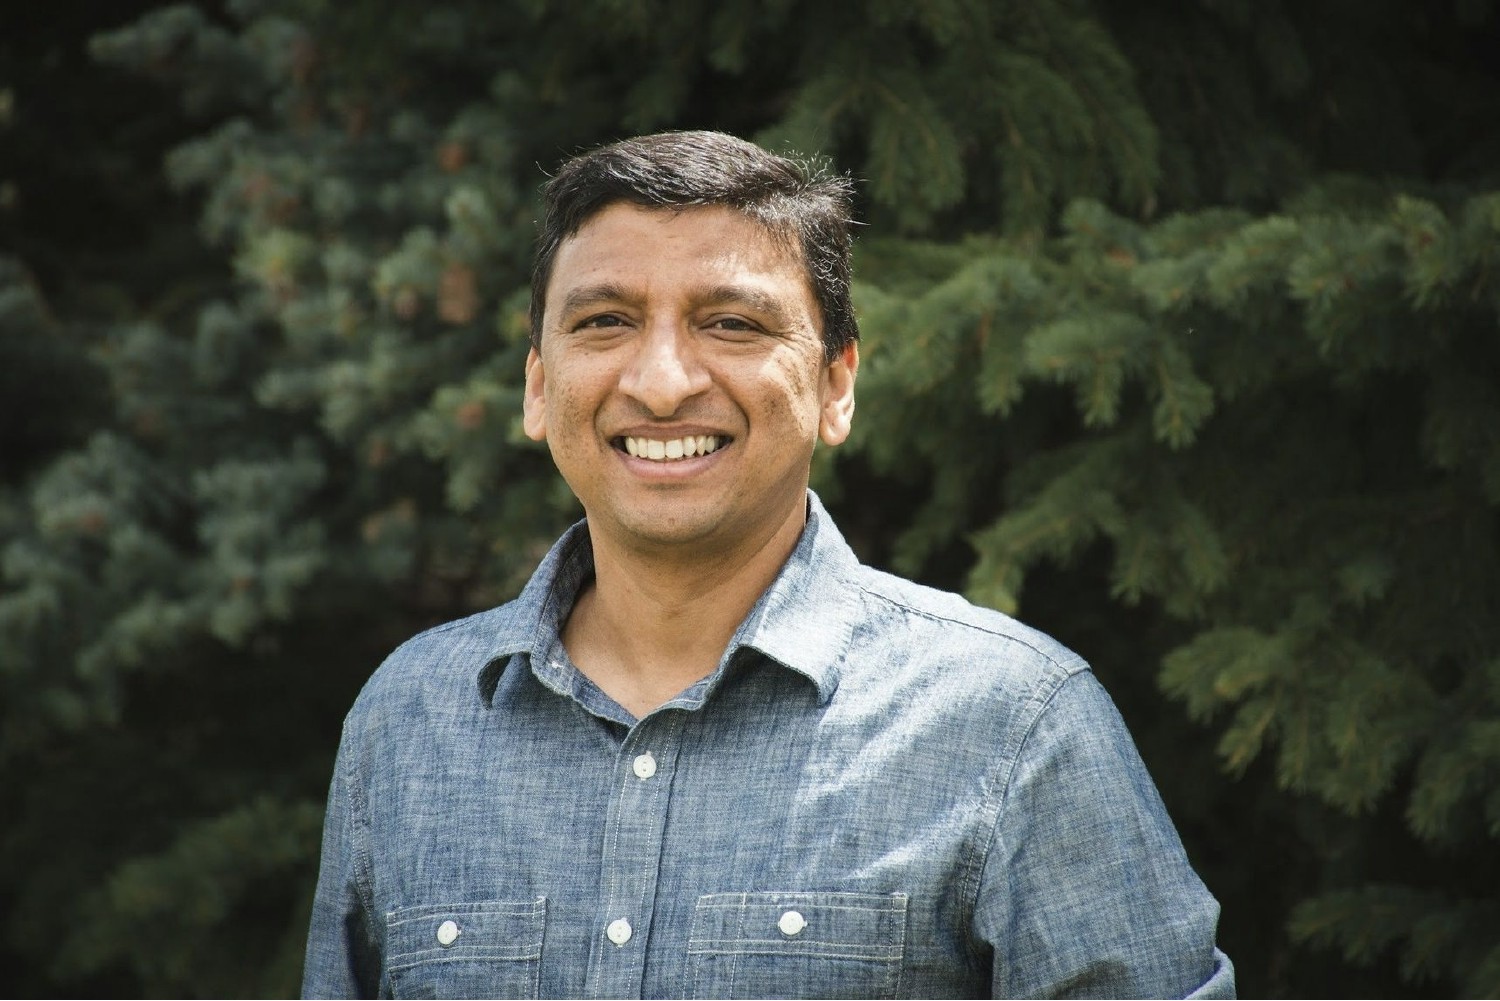 Anant Kale, CEO